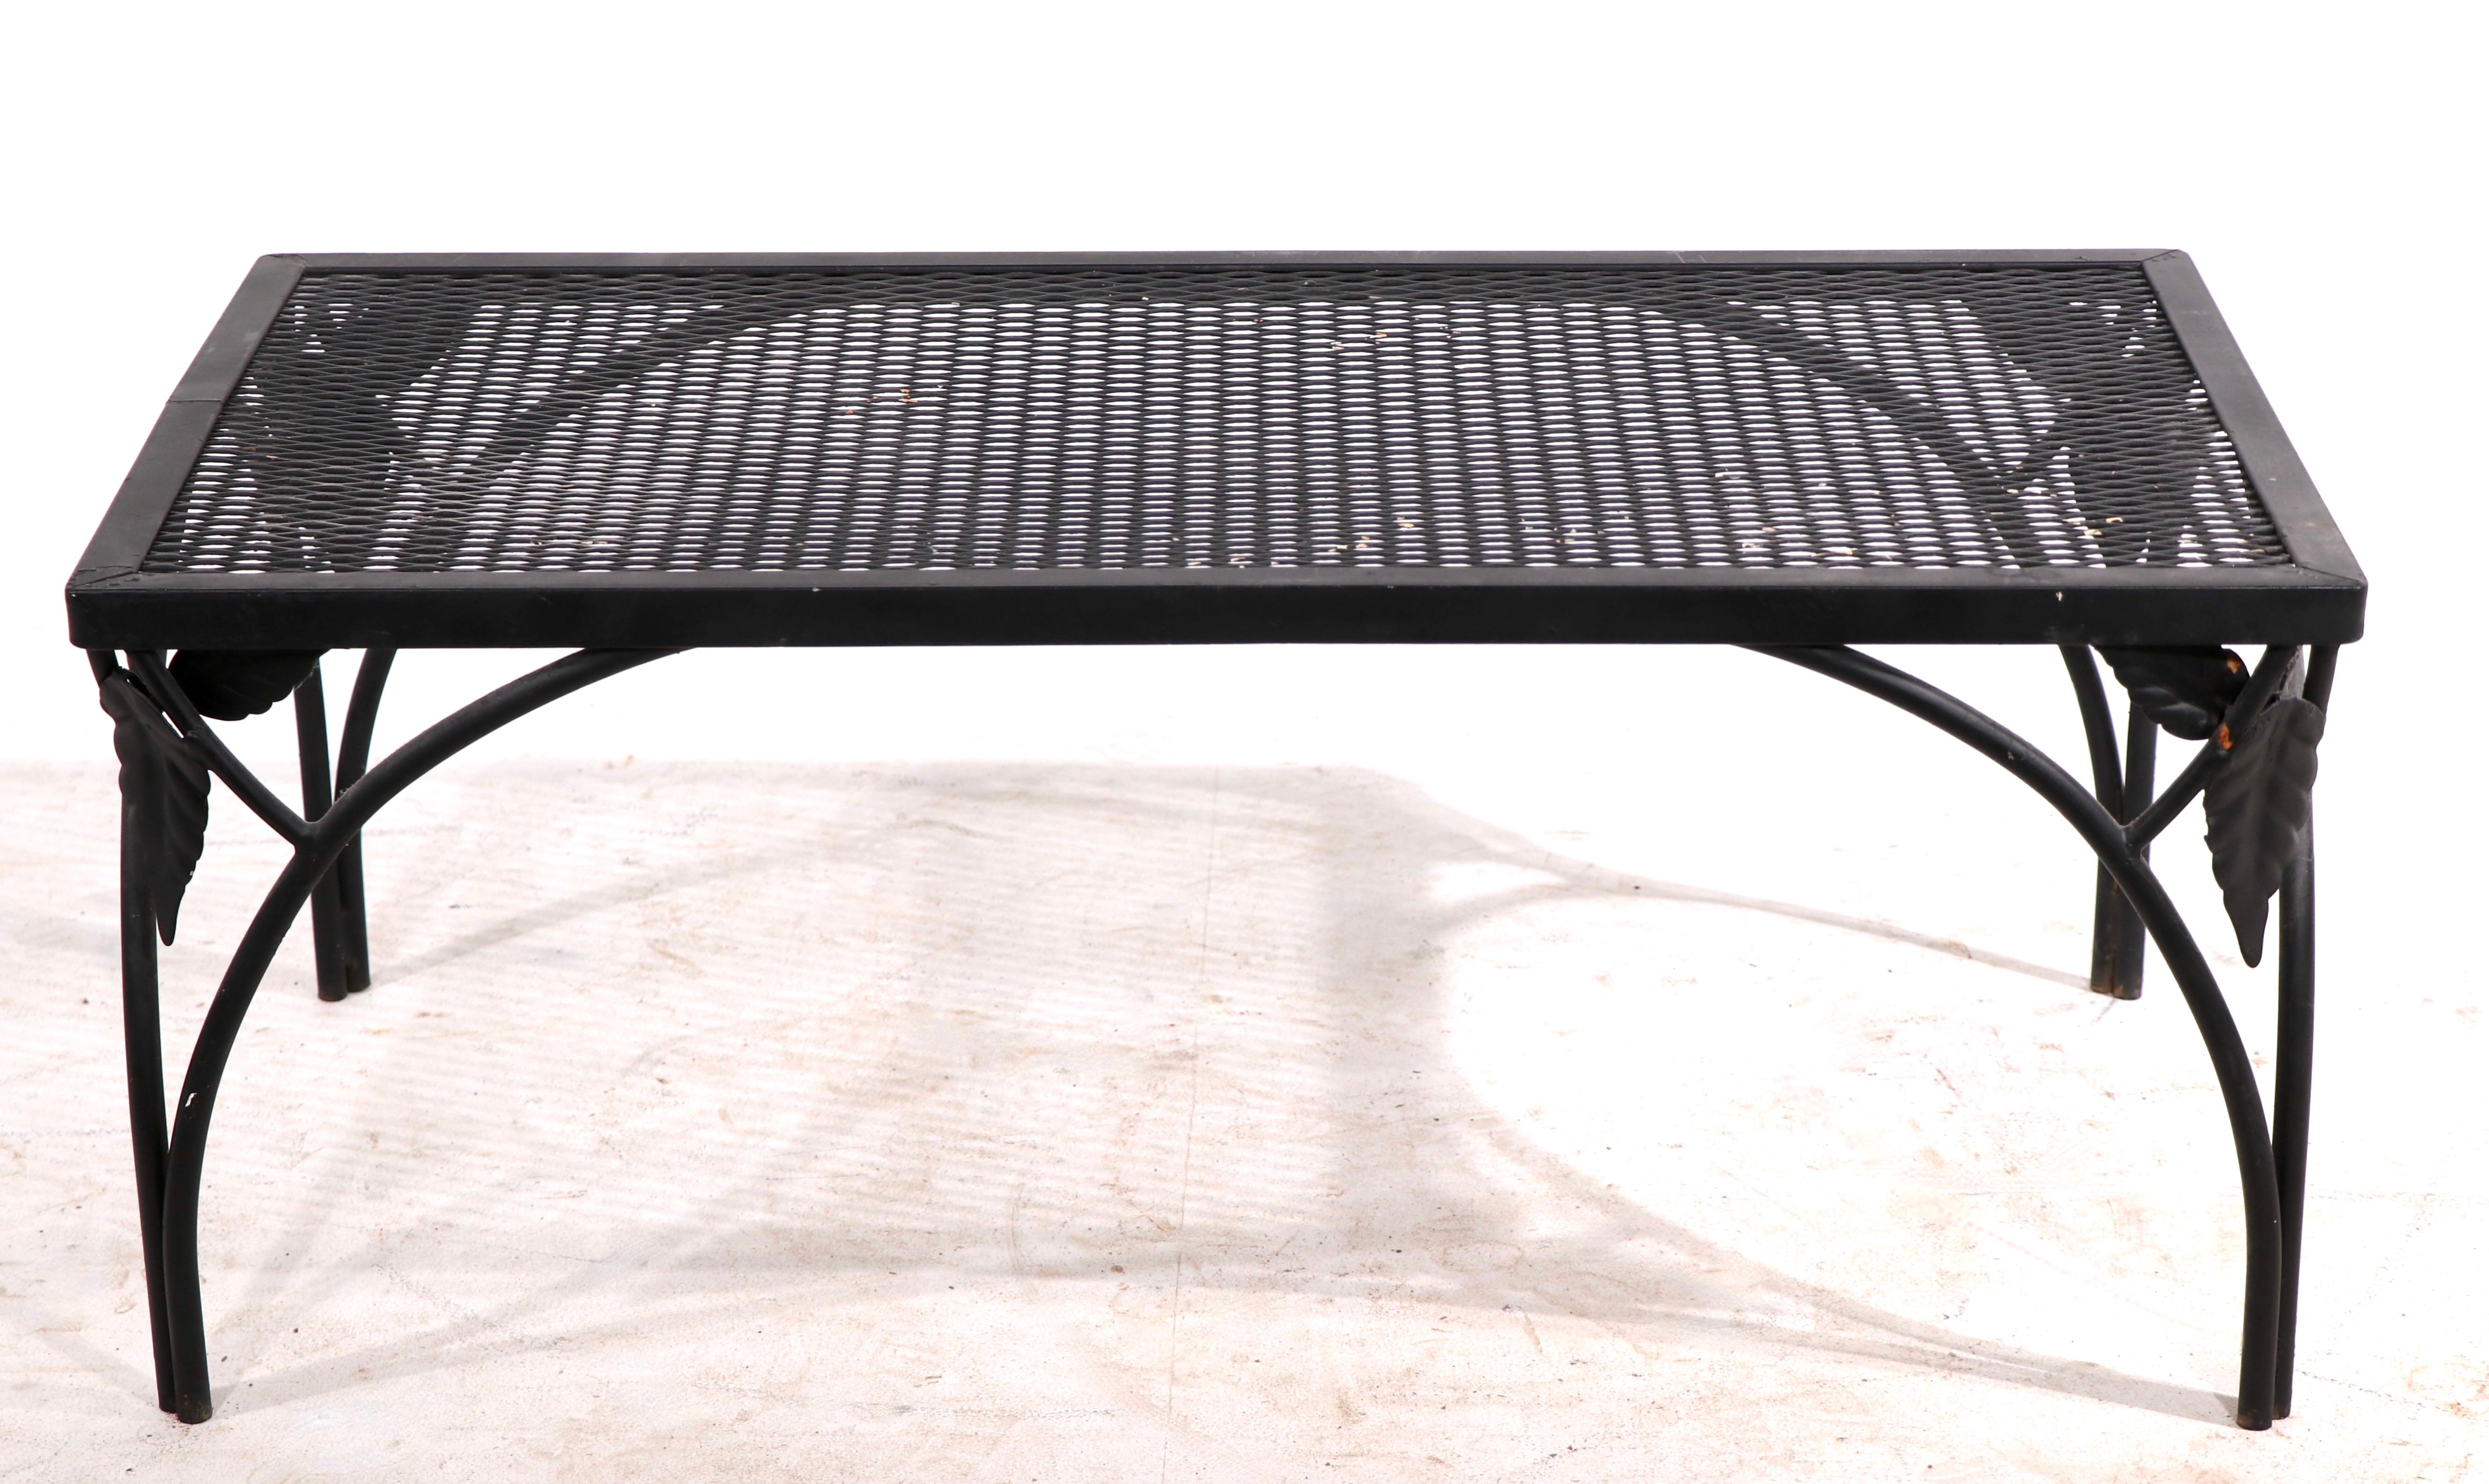 Unusual wrought iron coffee table having a metal mesh top with arched iron legs and decorative metal leaves at the corners. The table is structurally sound and sturdy, showing only light cosmetic wear, normal and consistent with age. Currently in